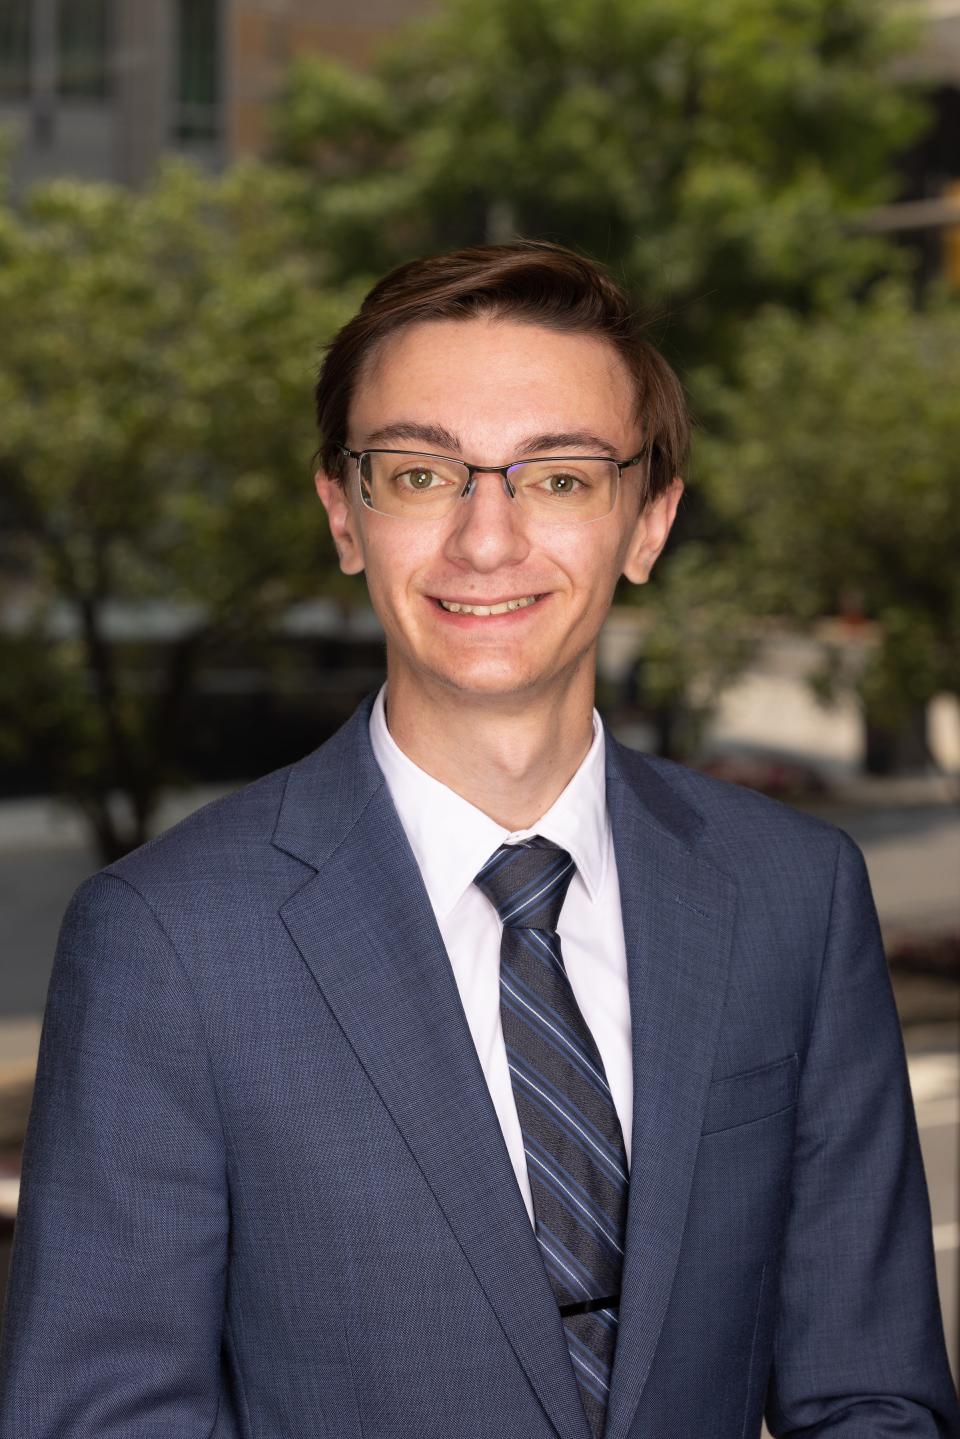 Rodge Reschini, a summer intern with USA TODAY Opinion, is a rising senior at Cornell University. He's the editor-in-chief of the Cornell Review.